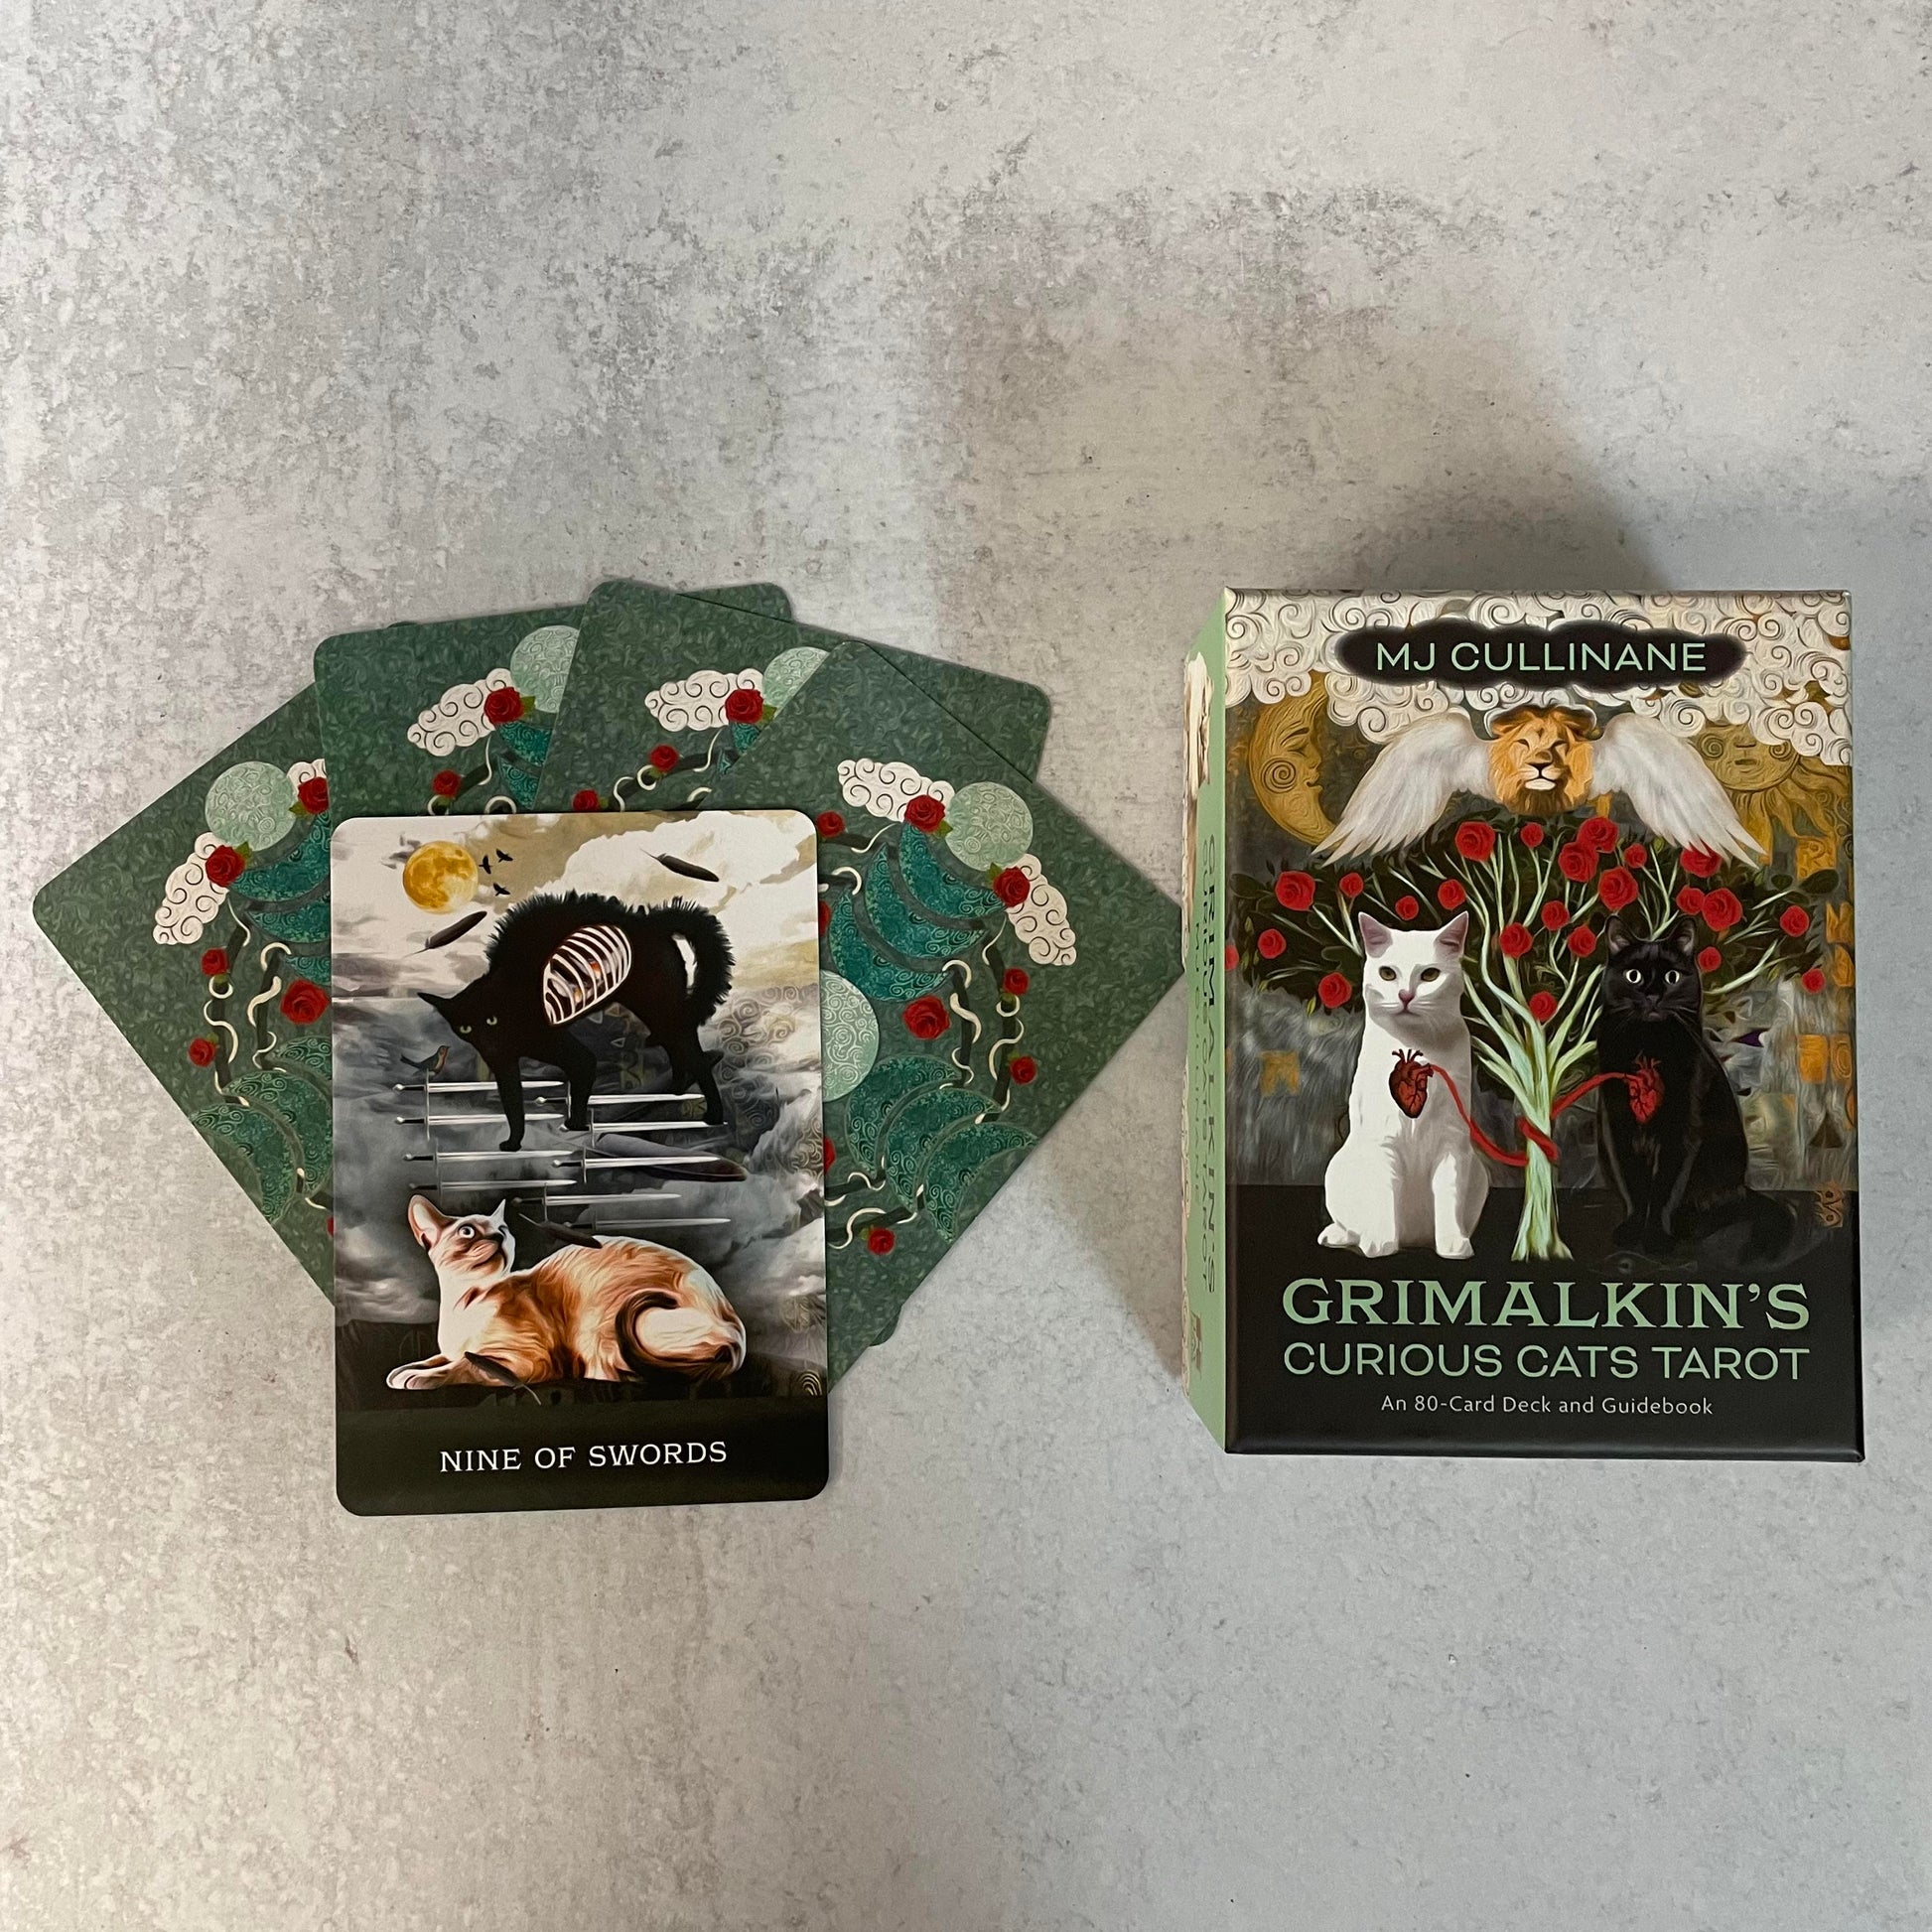 Curous Cats tarot overview